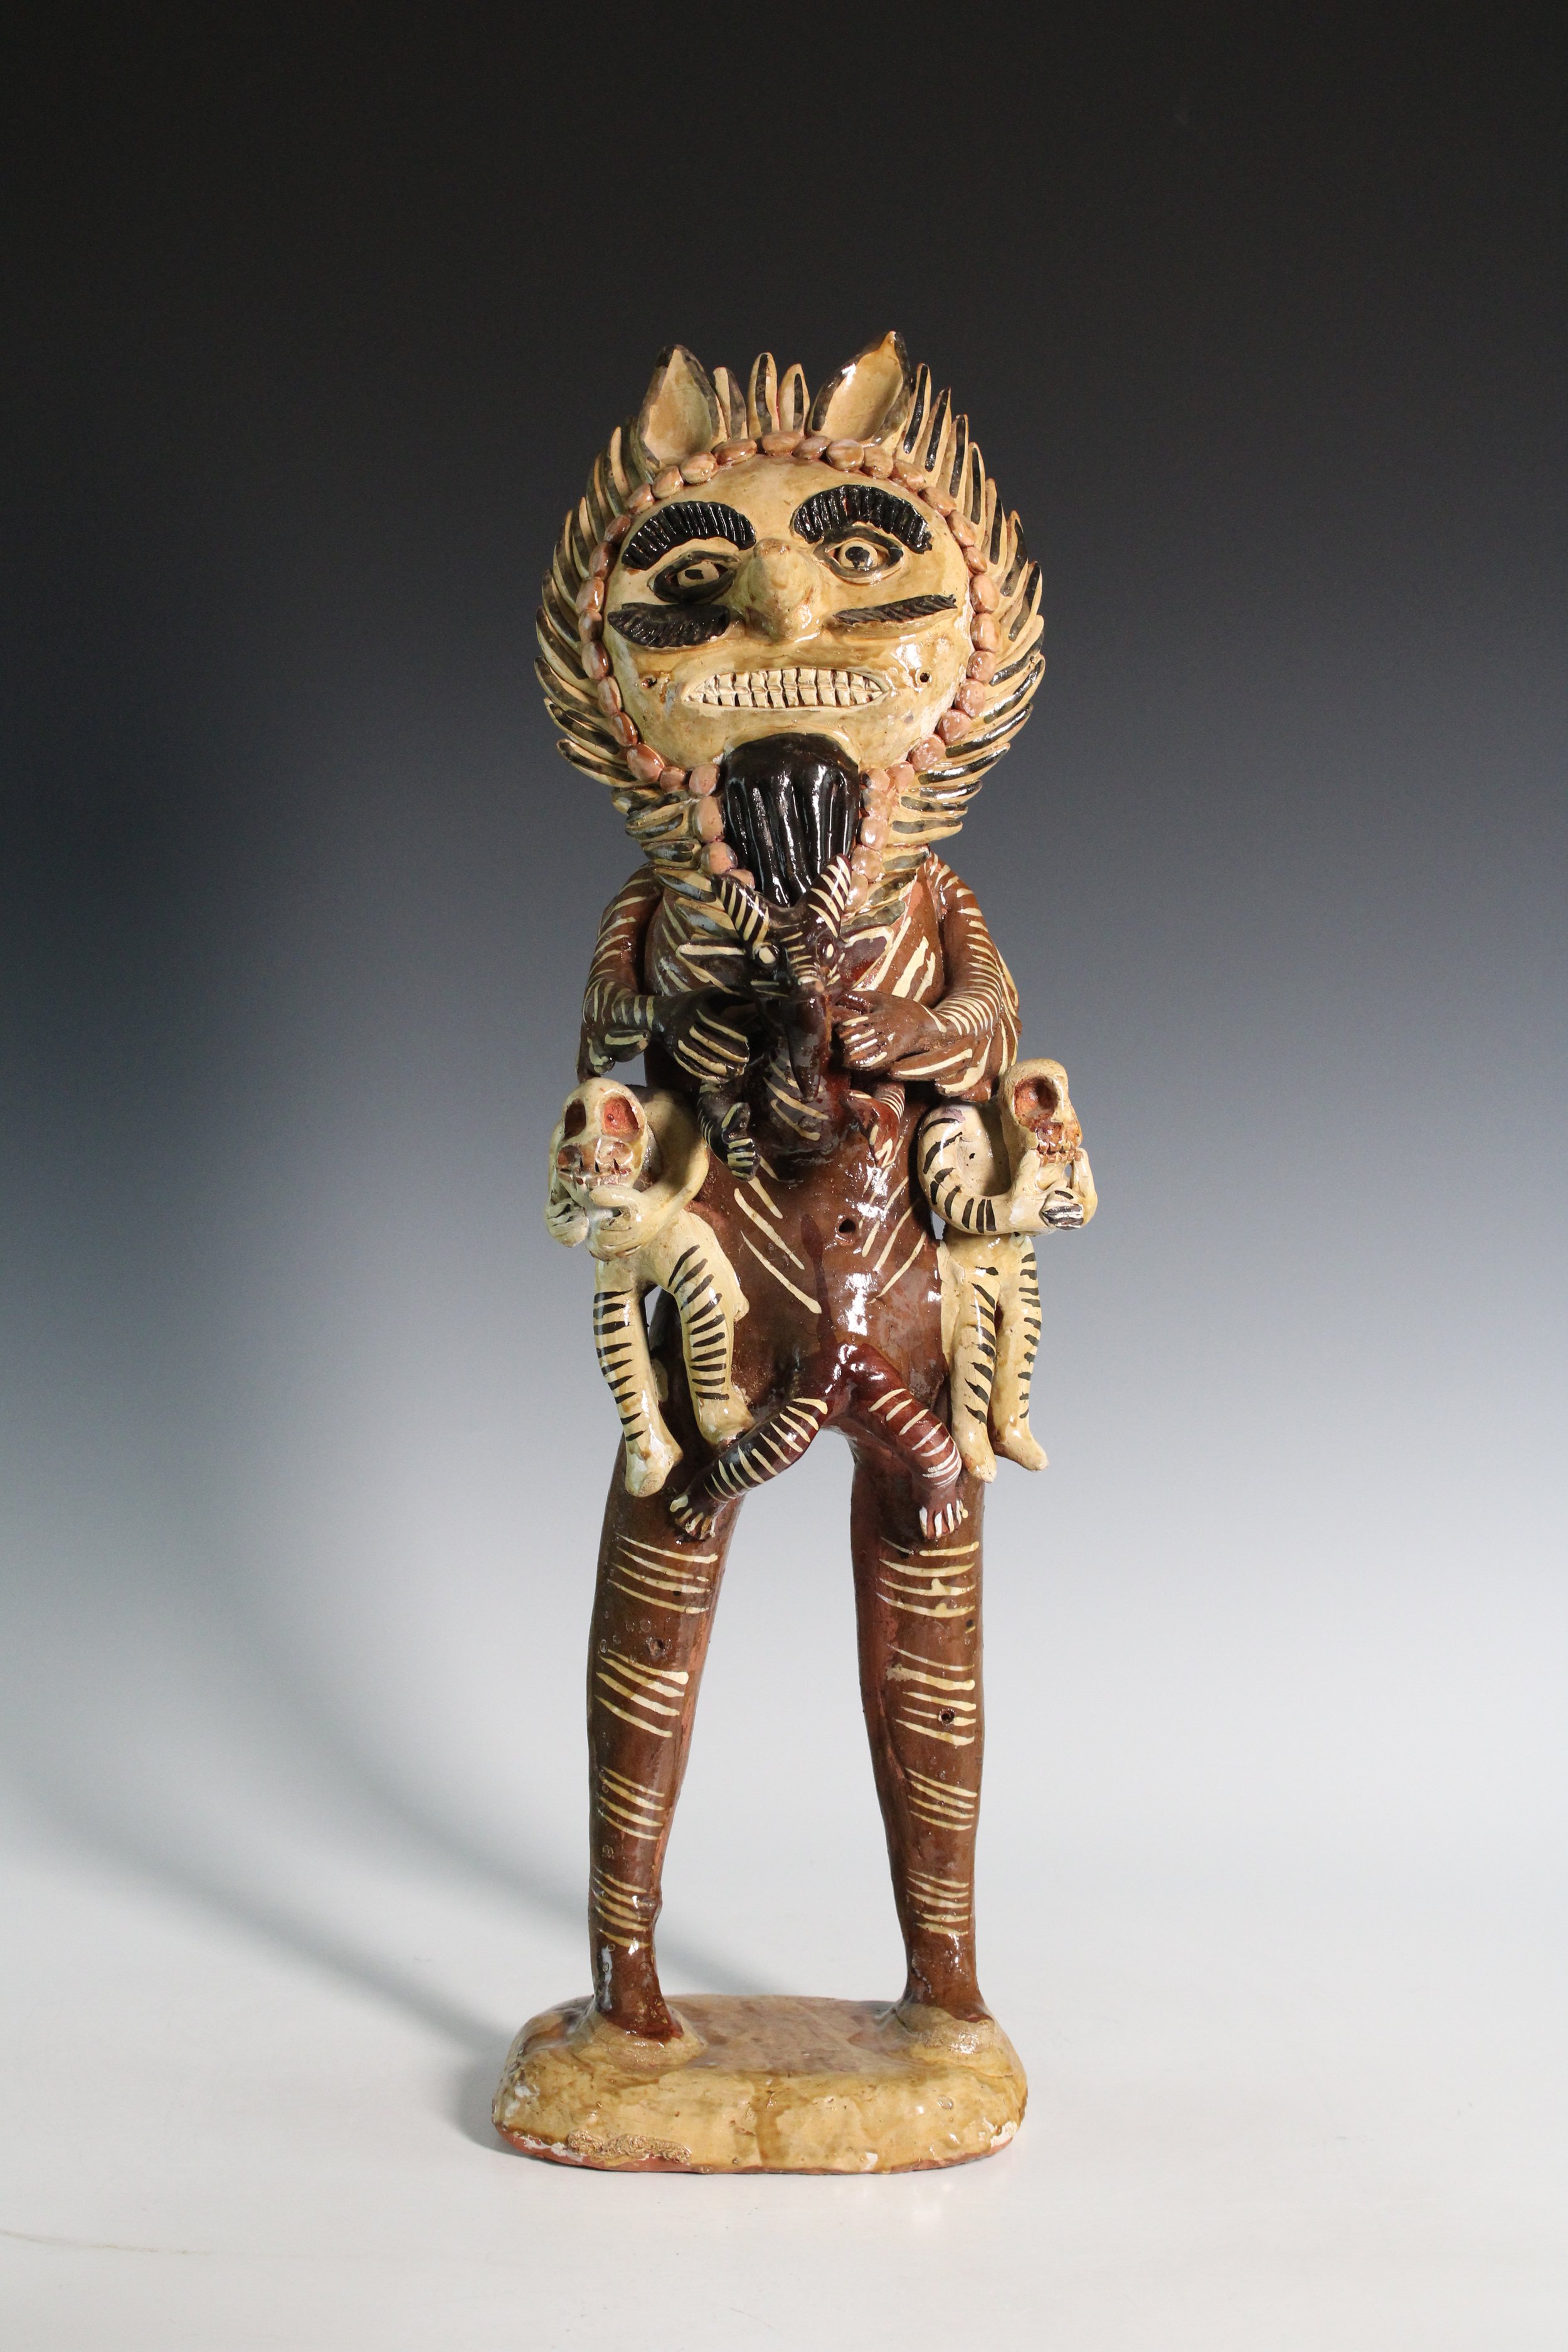 Mexican Folk Art Polychrome Earthenware Figurine Featuring the Devil and the Dead, Mid-20th Century